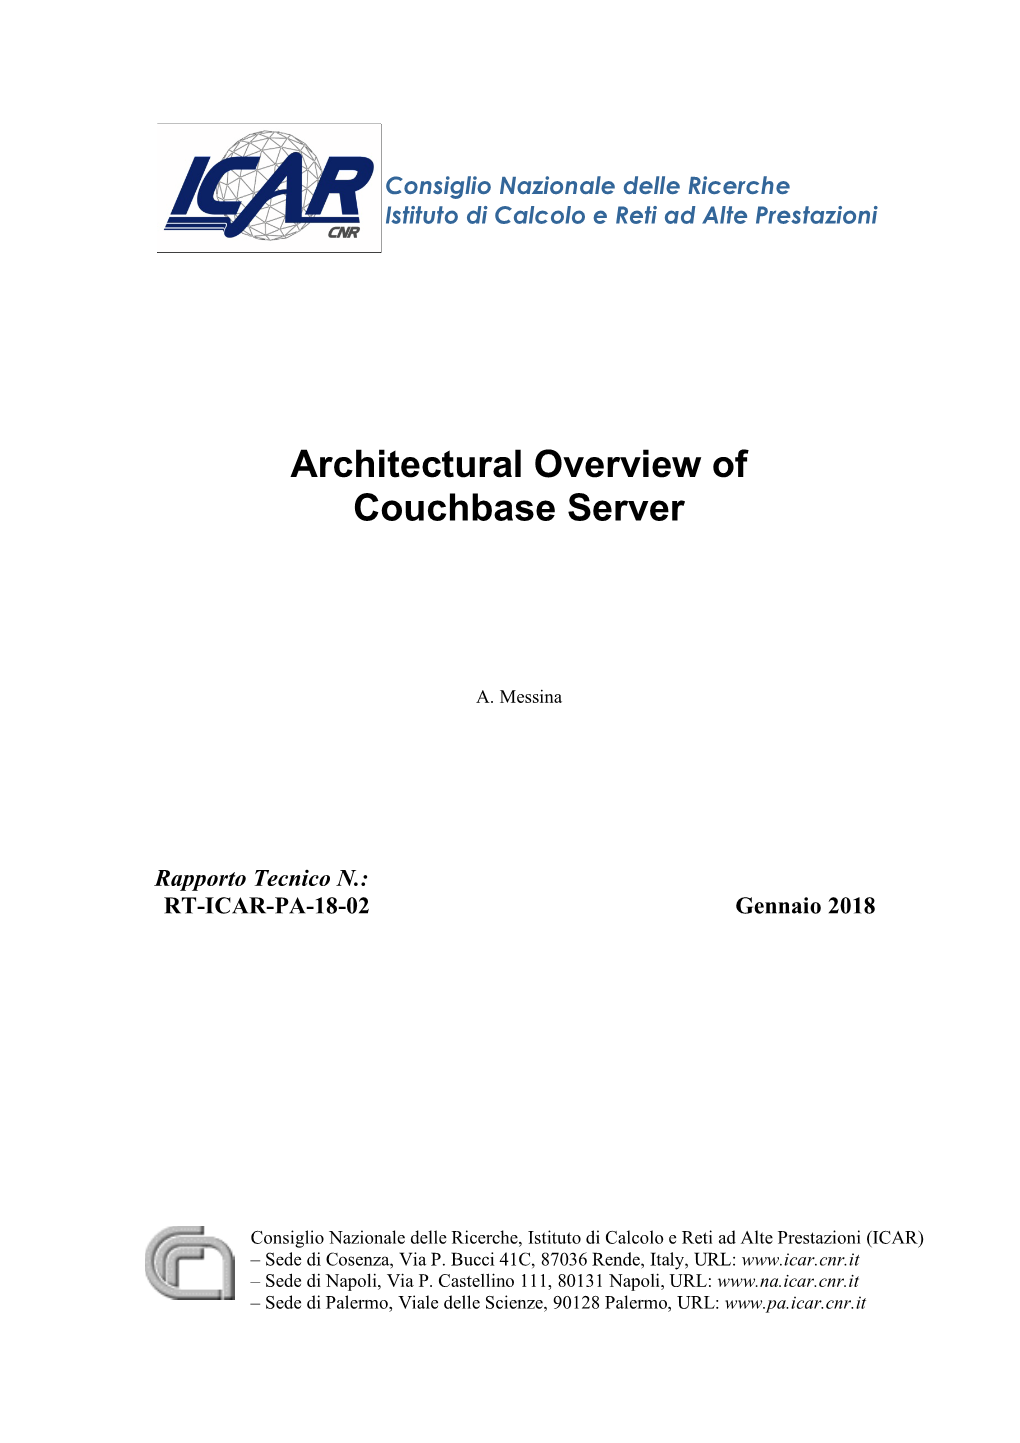 Architectural Overview of Couchbase Server